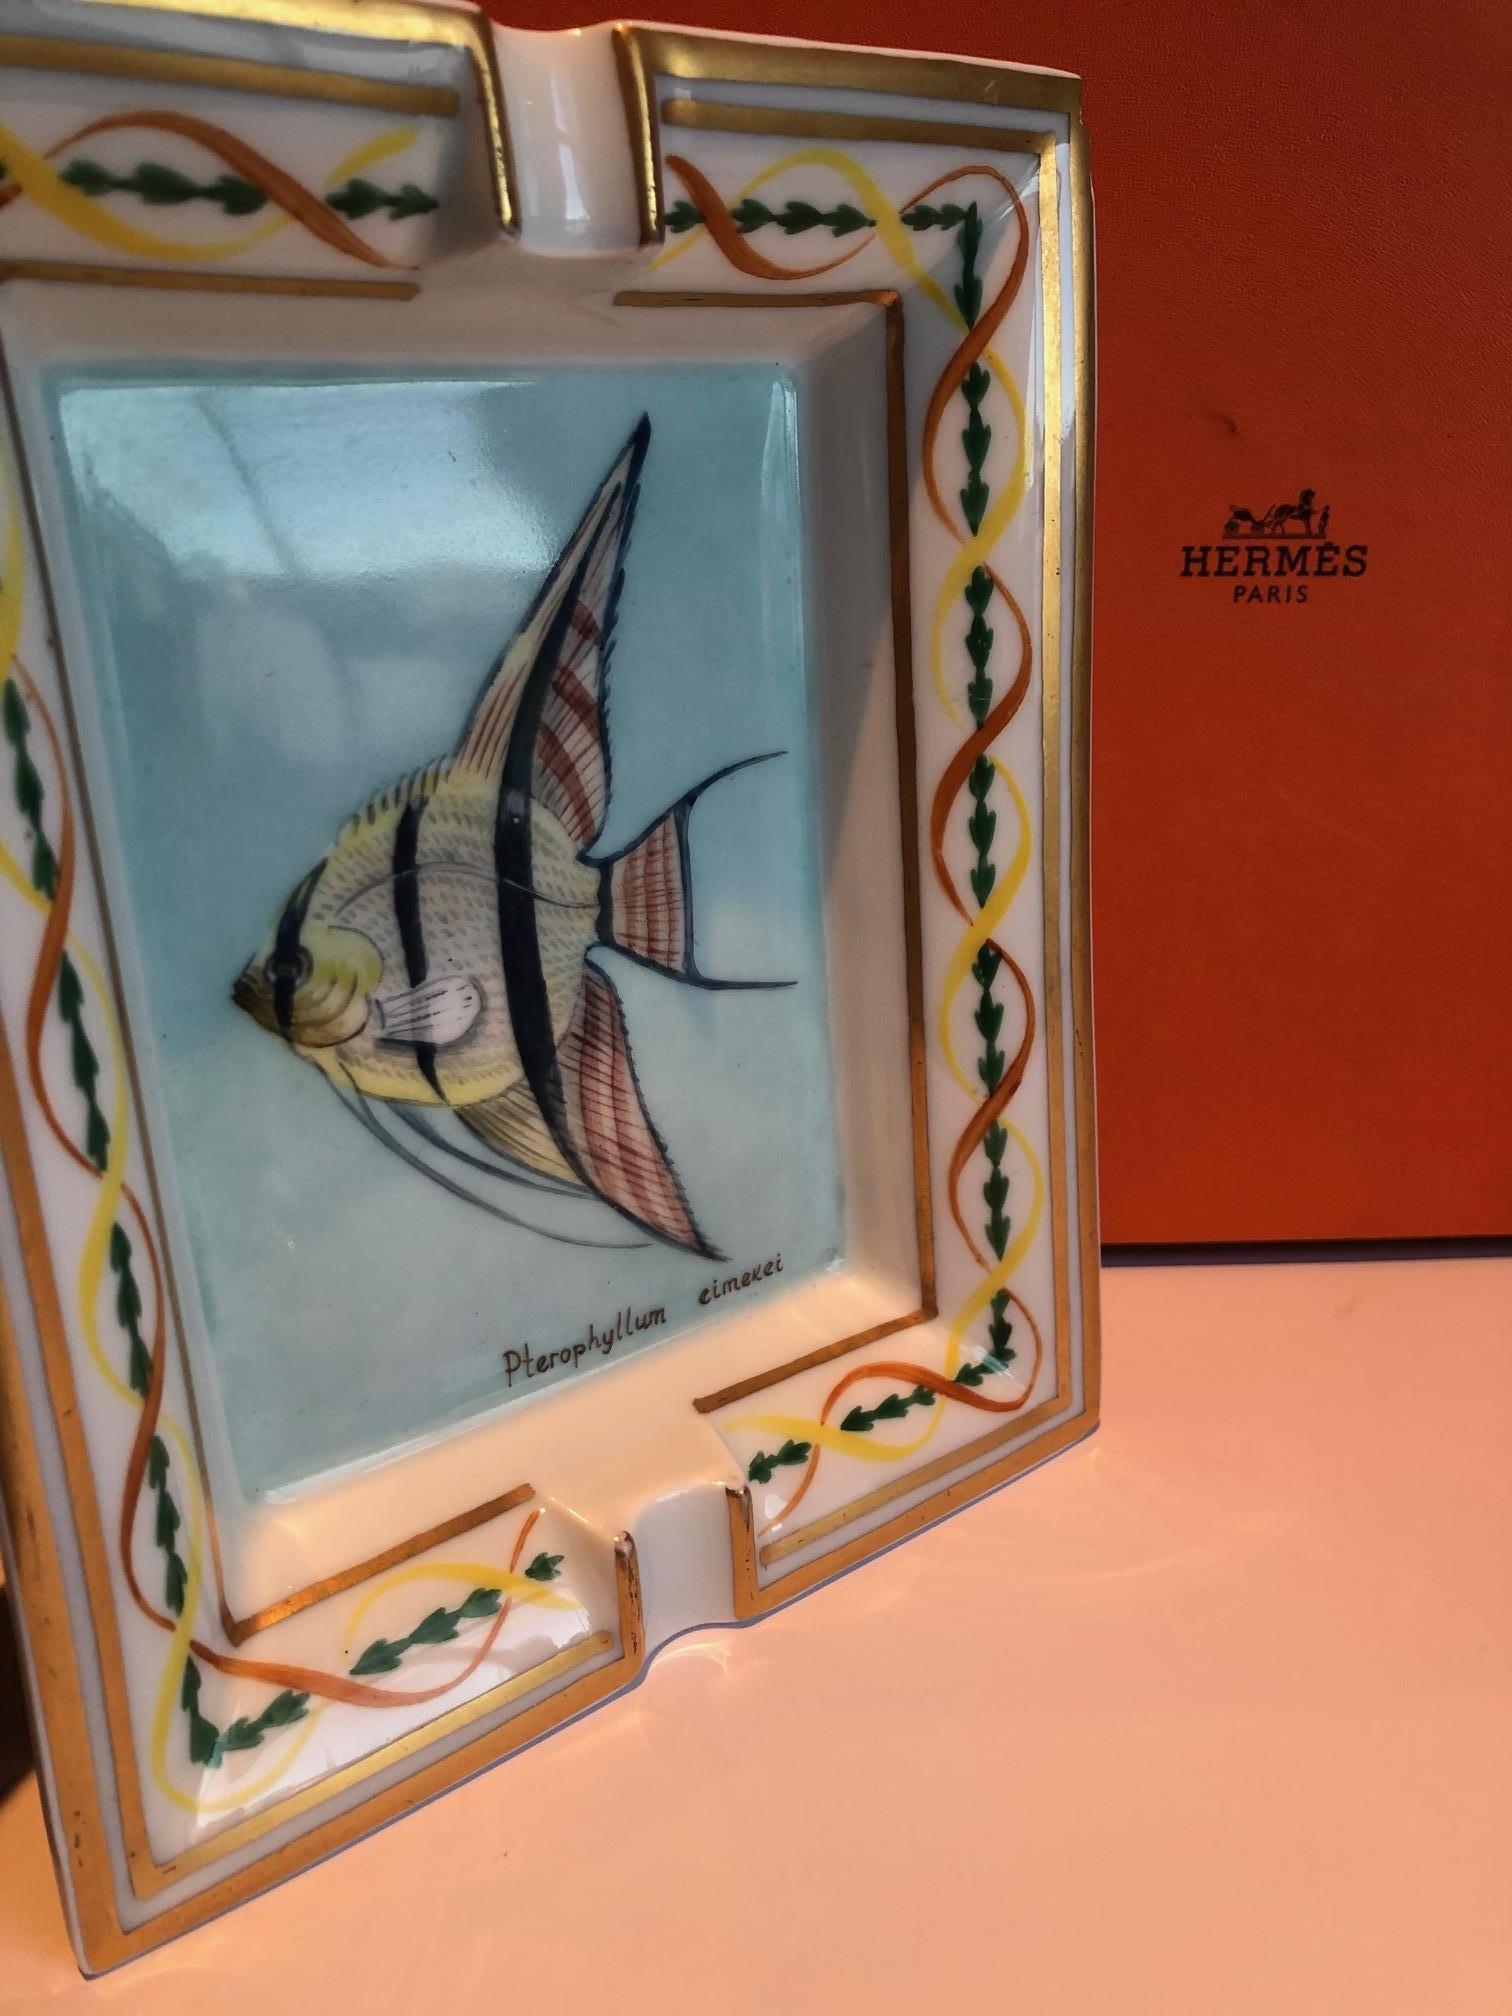 HERMÈS Vintage Flying Fish Porcelain 24 k Gold plated Ashtray W/Box C.1990s

Hermès  Porcelain ashtray with flying fish decors. Hand brush printed with 24 k gold plated with rich thick gold  tone stripes, multi colour arabesque with a flying fish, 